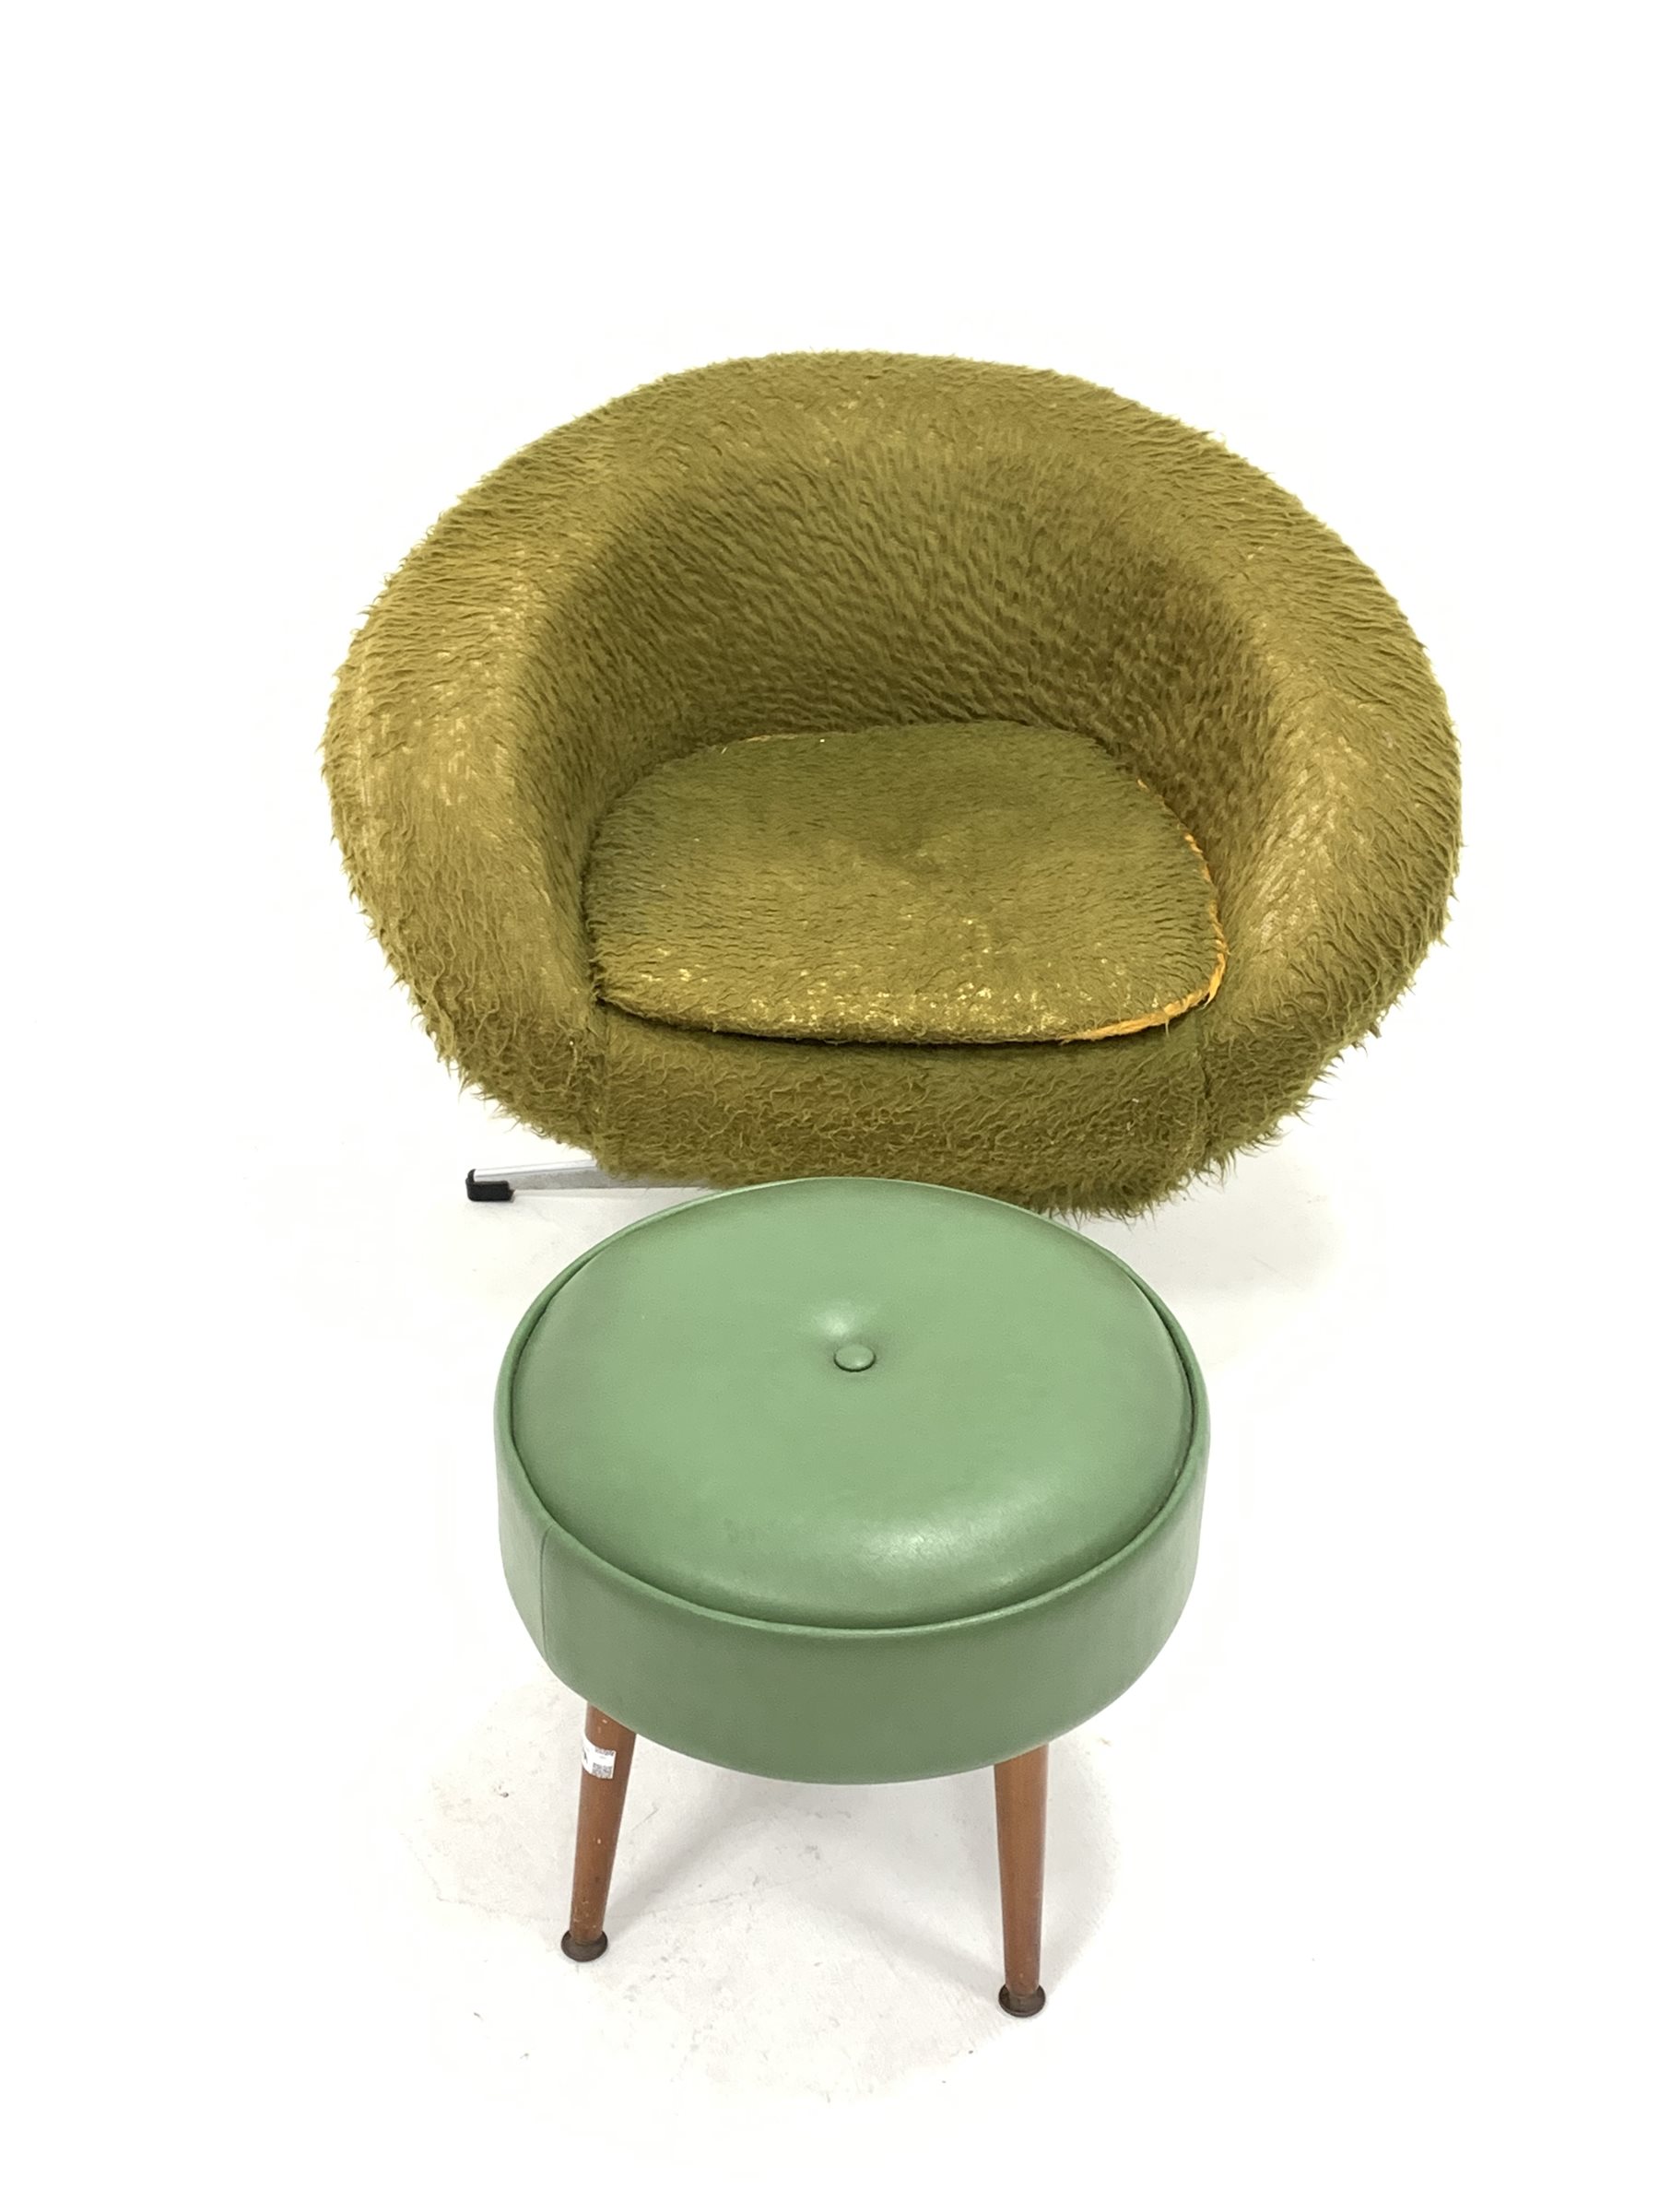 Mid 20th century swivel chair, upholstered in green faux fur, raised on chrome four point base () to - Image 3 of 3